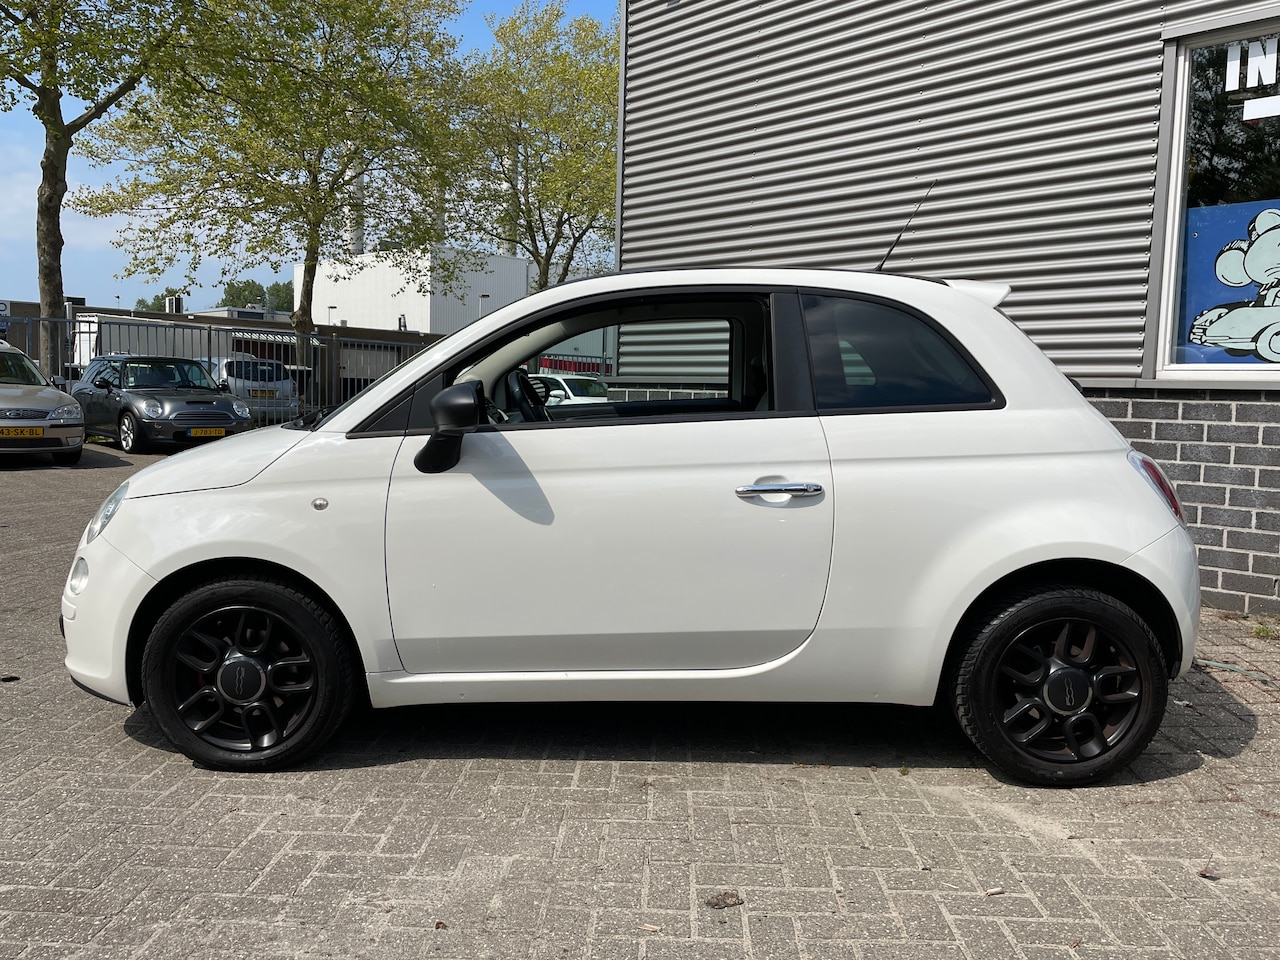 Fiat 500 - Black and White. Airco. 4cilinder.